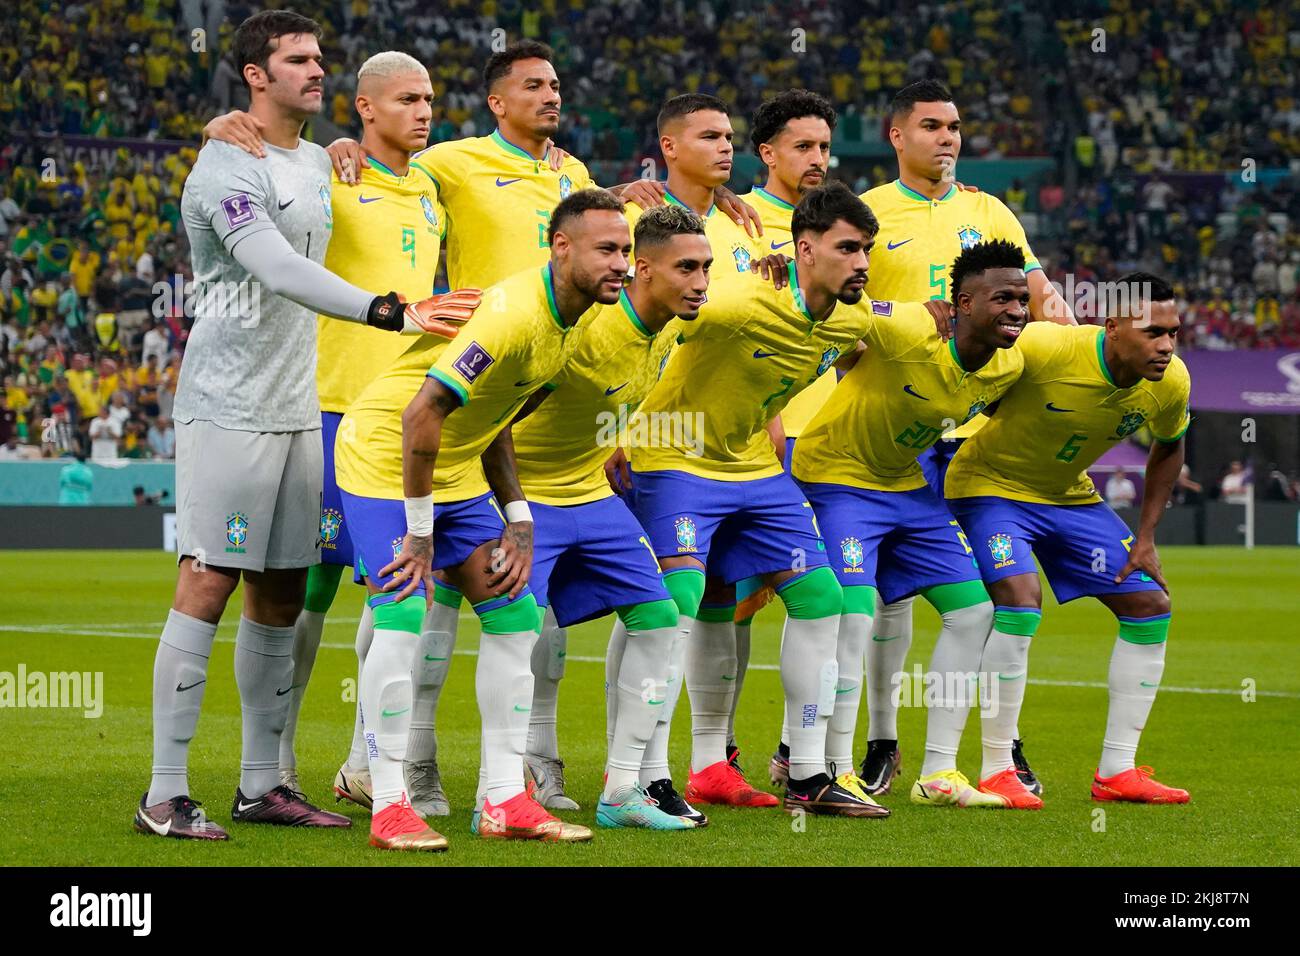 Brazil team group during the FIFA World Cup Qatar 2022 match, Group G, between Brazil and Serbia played at Lusail Stadium on Nov 24, 2022 in Lusail, Qatar. (Photo by Bagu Blanco / PRESSIN) Credit: PRESSINPHOTO SPORTS AGENCY/Alamy Live News Stock Photo